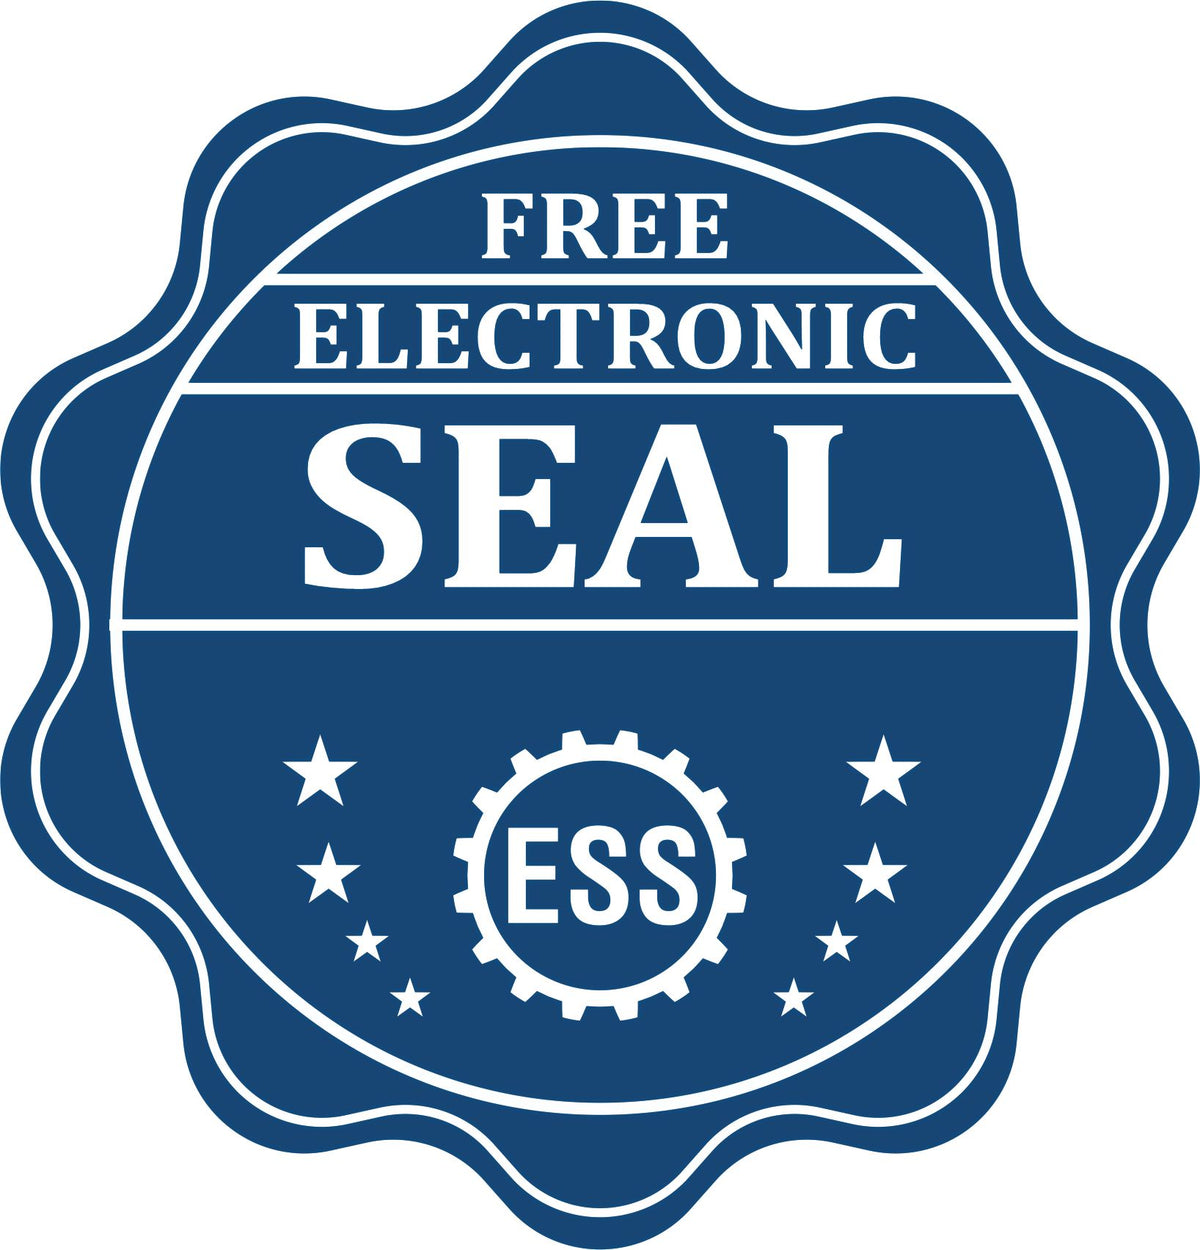 A badge showing a free electronic seal for the Gift Nevada Landscape Architect Seal with stars and the ESS gear on the emblem.